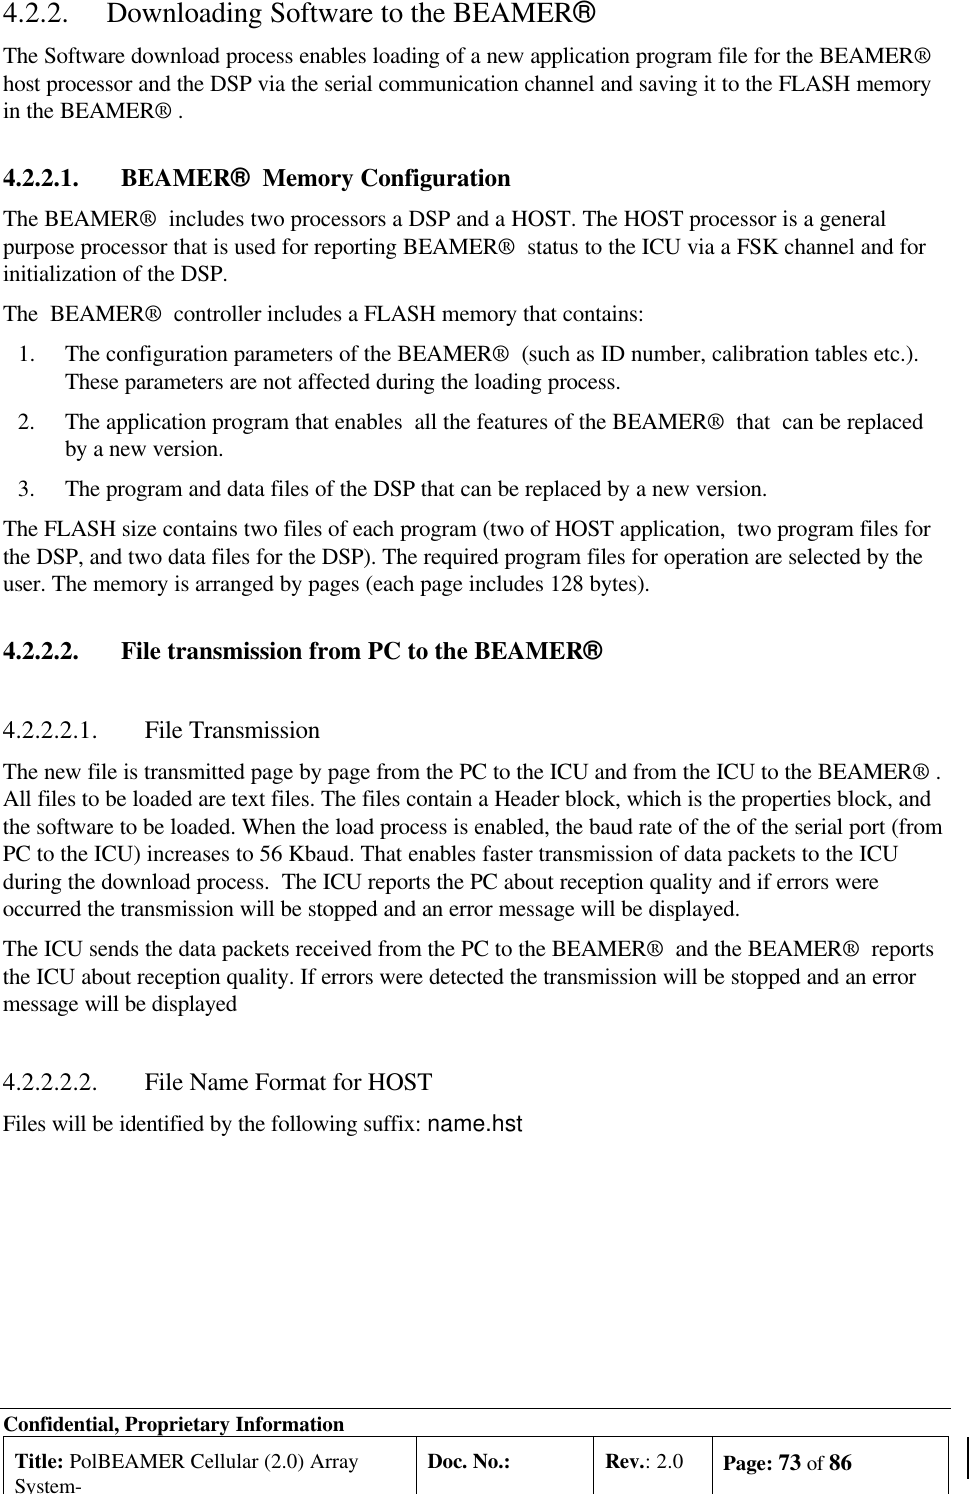 Confidential, Proprietary InformationTitle: PolBEAMER Cellular (2.0) ArraySystem-Doc. No.: Rev.: 2.0 Page: 73 of 864.2.2. Downloading Software to the BEAMER®The Software download process enables loading of a new application program file for the BEAMER®host processor and the DSP via the serial communication channel and saving it to the FLASH memoryin the BEAMER® .4.2.2.1. BEAMER®  Memory ConfigurationThe BEAMER®  includes two processors a DSP and a HOST. The HOST processor is a generalpurpose processor that is used for reporting BEAMER®  status to the ICU via a FSK channel and forinitialization of the DSP.The  BEAMER®  controller includes a FLASH memory that contains:1.The configuration parameters of the BEAMER®  (such as ID number, calibration tables etc.).These parameters are not affected during the loading process.2.The application program that enables  all the features of the BEAMER®  that  can be replacedby a new version.3.The program and data files of the DSP that can be replaced by a new version.The FLASH size contains two files of each program (two of HOST application,  two program files forthe DSP, and two data files for the DSP). The required program files for operation are selected by theuser. The memory is arranged by pages (each page includes 128 bytes).4.2.2.2. File transmission from PC to the BEAMER®4.2.2.2.1. File TransmissionThe new file is transmitted page by page from the PC to the ICU and from the ICU to the BEAMER® .All files to be loaded are text files. The files contain a Header block, which is the properties block, andthe software to be loaded. When the load process is enabled, the baud rate of the of the serial port (fromPC to the ICU) increases to 56 Kbaud. That enables faster transmission of data packets to the ICUduring the download process.  The ICU reports the PC about reception quality and if errors wereoccurred the transmission will be stopped and an error message will be displayed.The ICU sends the data packets received from the PC to the BEAMER®  and the BEAMER®  reportsthe ICU about reception quality. If errors were detected the transmission will be stopped and an errormessage will be displayed4.2.2.2.2. File Name Format for HOSTFiles will be identified by the following suffix: name.hst